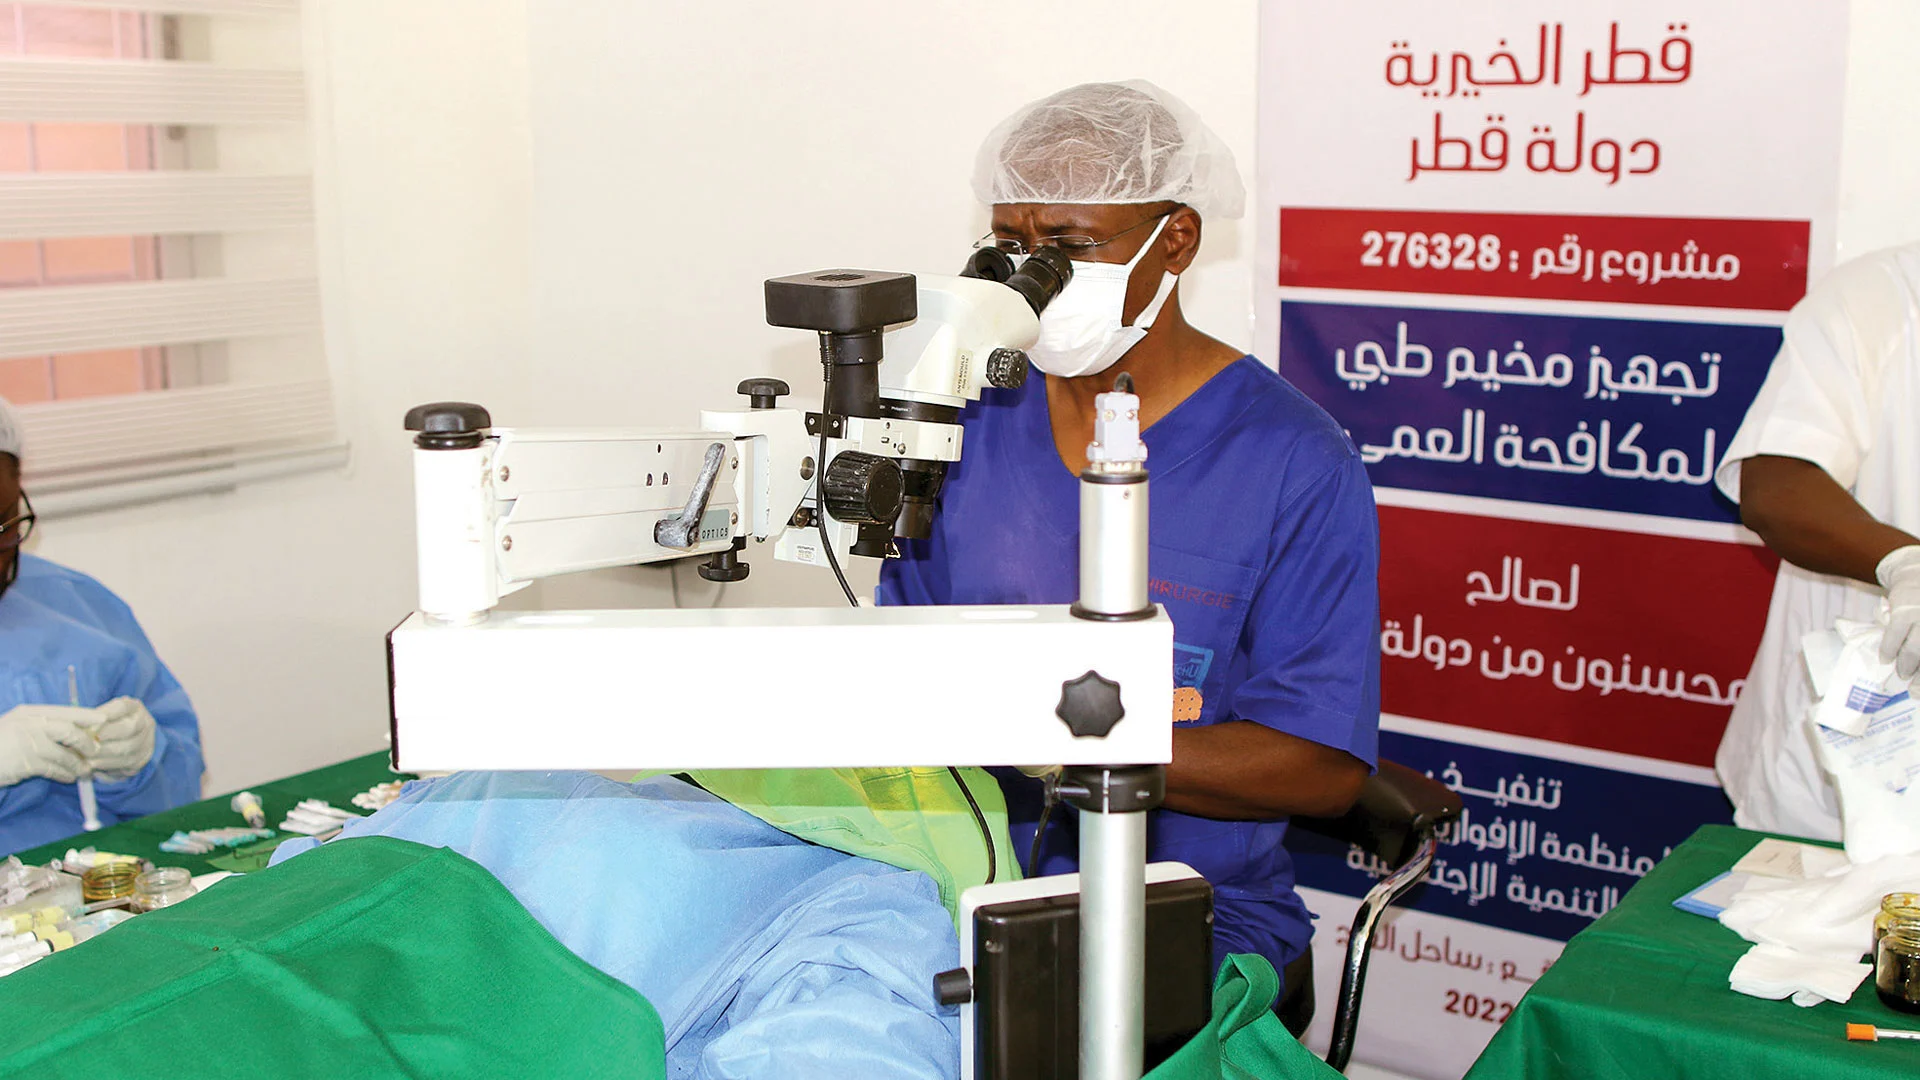 Qatar Charity Launches '50,000 Lives' Campaign for Eye Patient Treatment